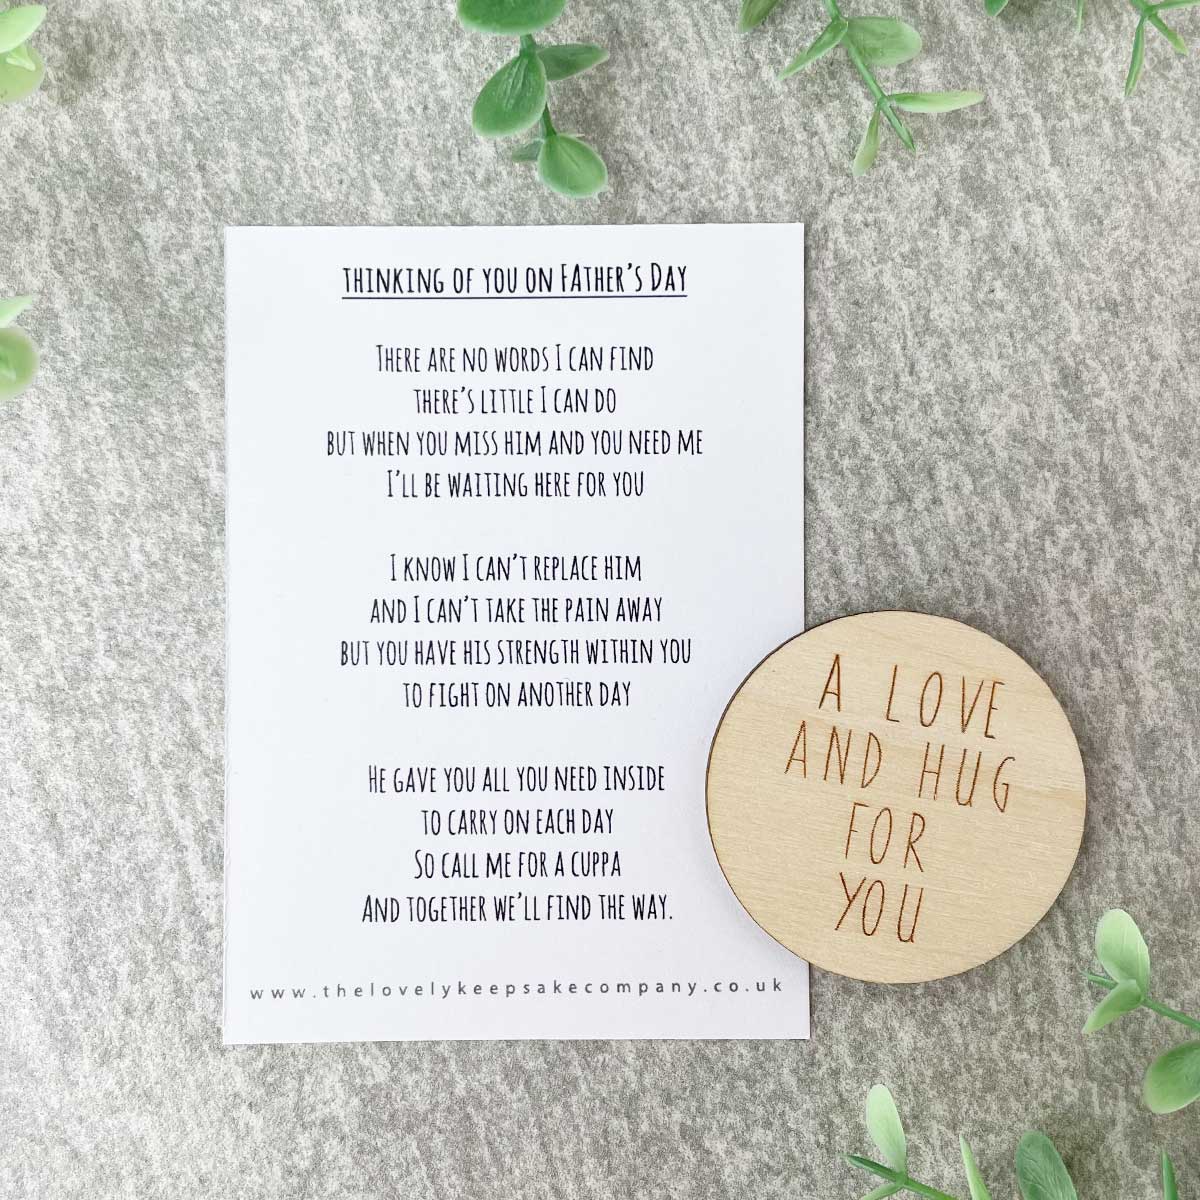 Thinking Of You On Father's Day Poem + Love & Hug Wooden Disc